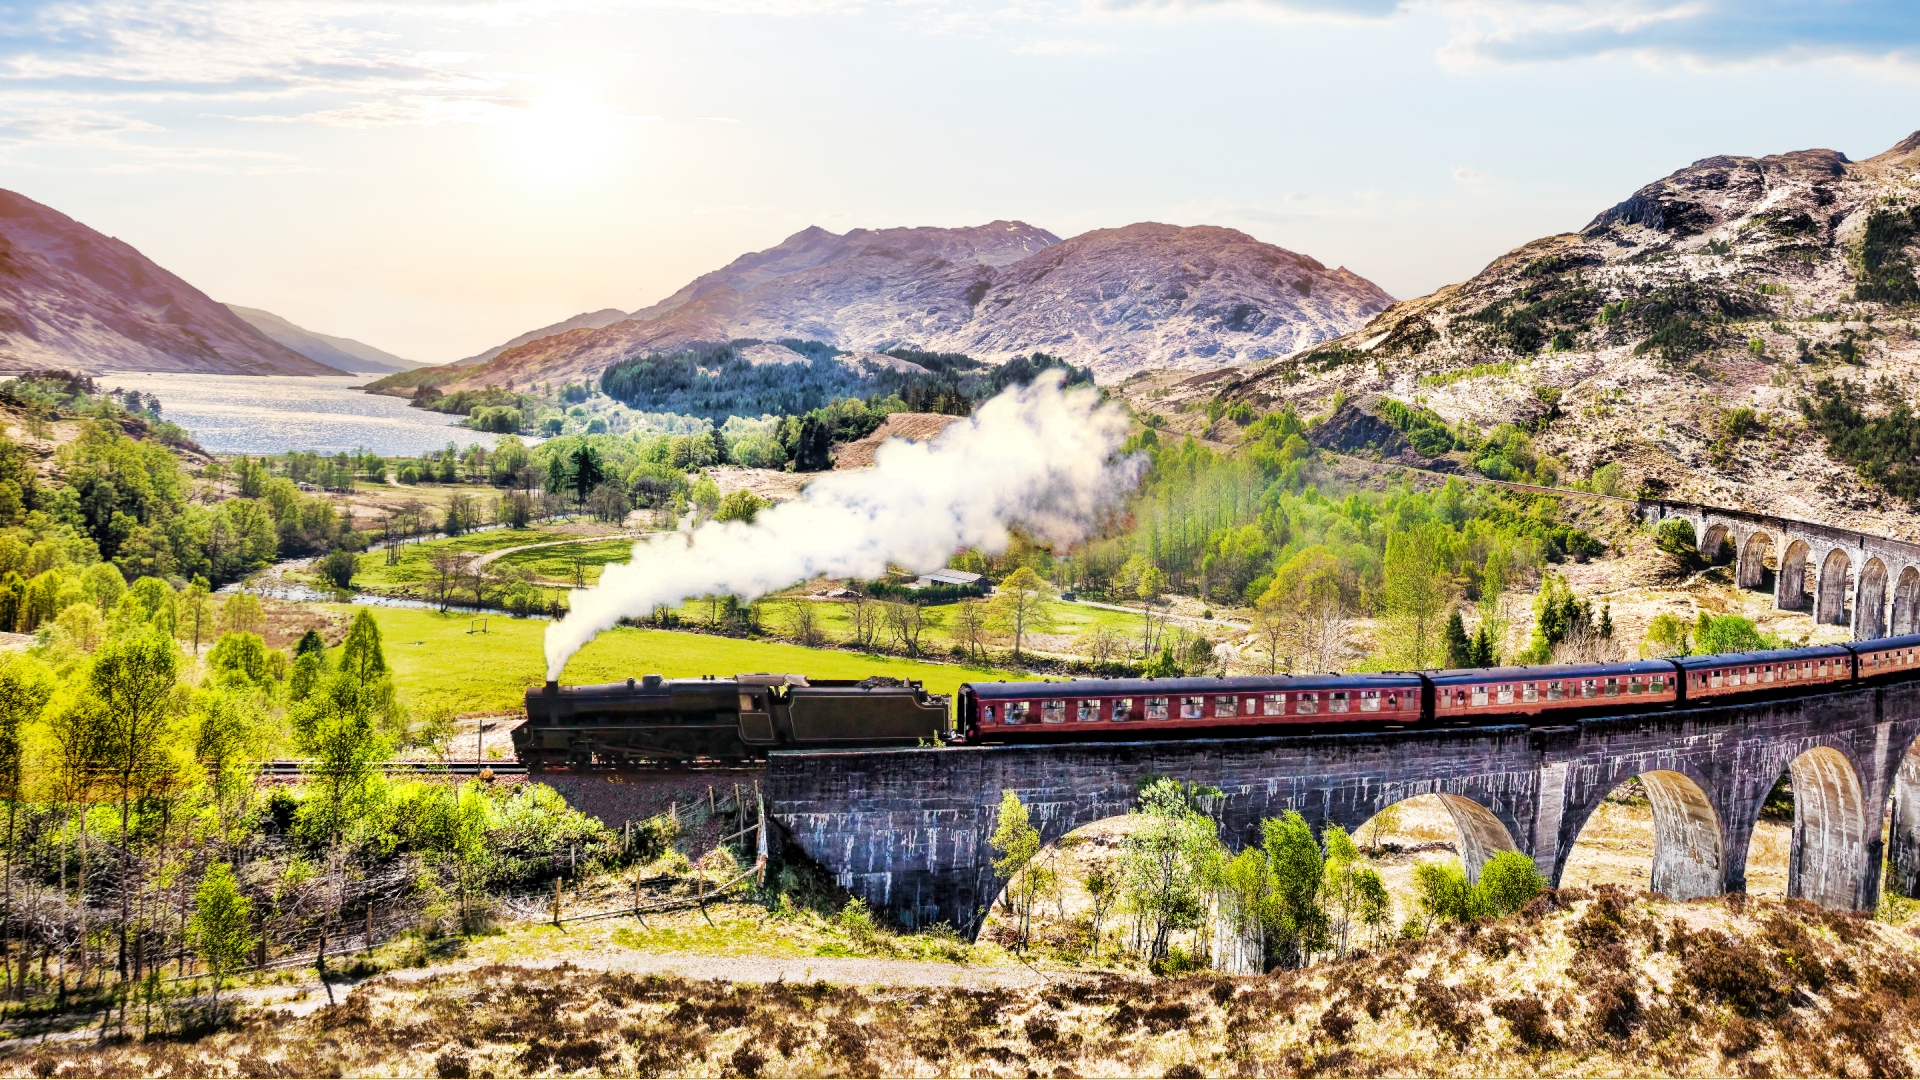 The Jacobite train runs between Mallaig and Fort William from March to October, crossing the Glenfinnan Viaduct.